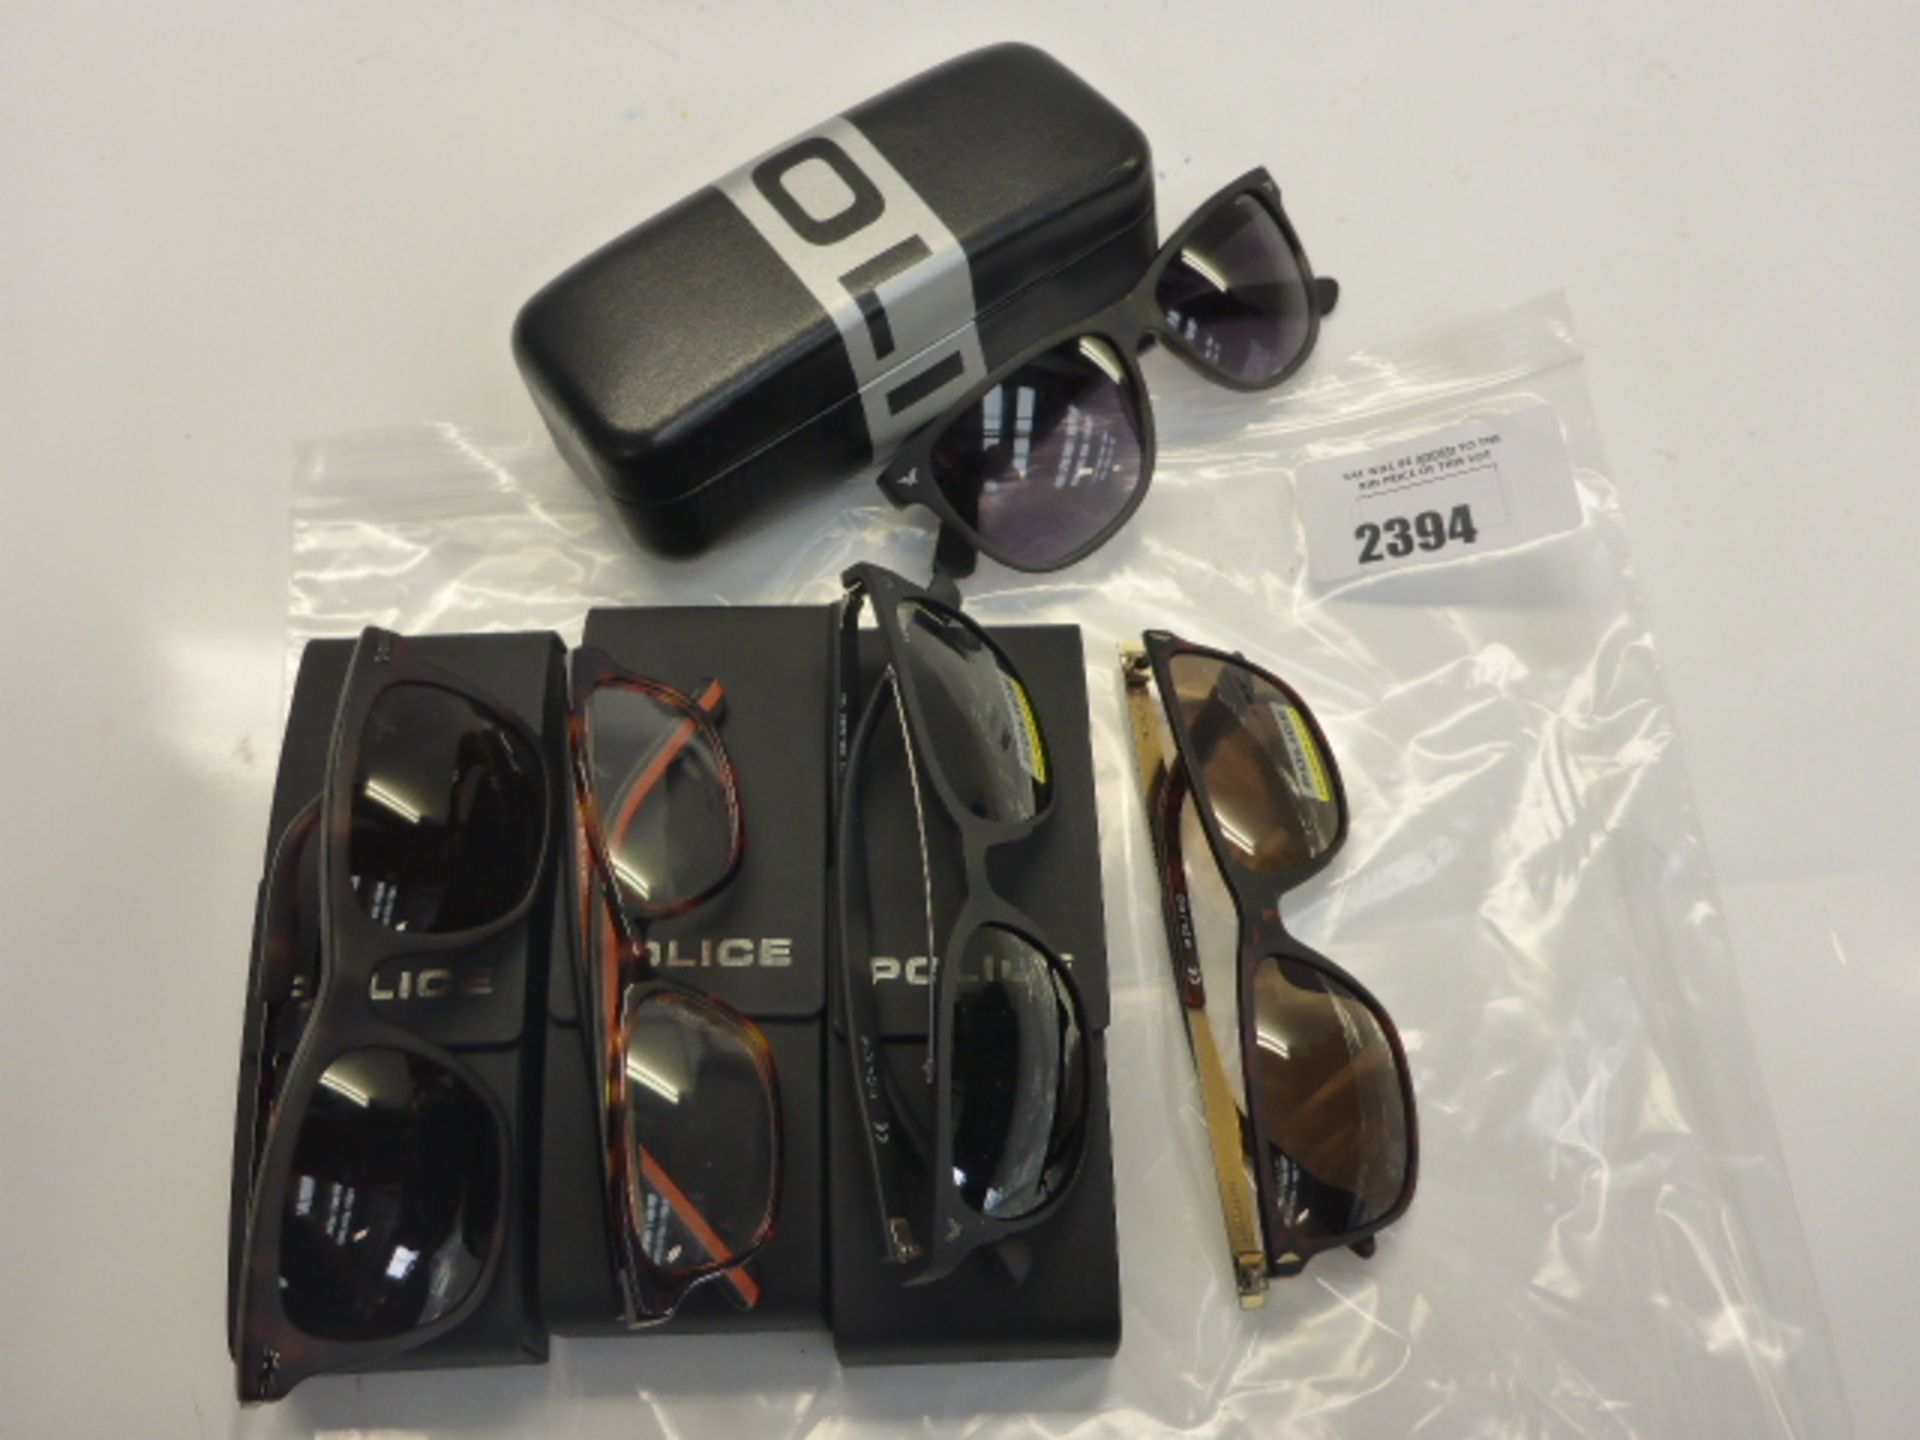 4 sets of. Police reading and sunglasses with cases with one loose set